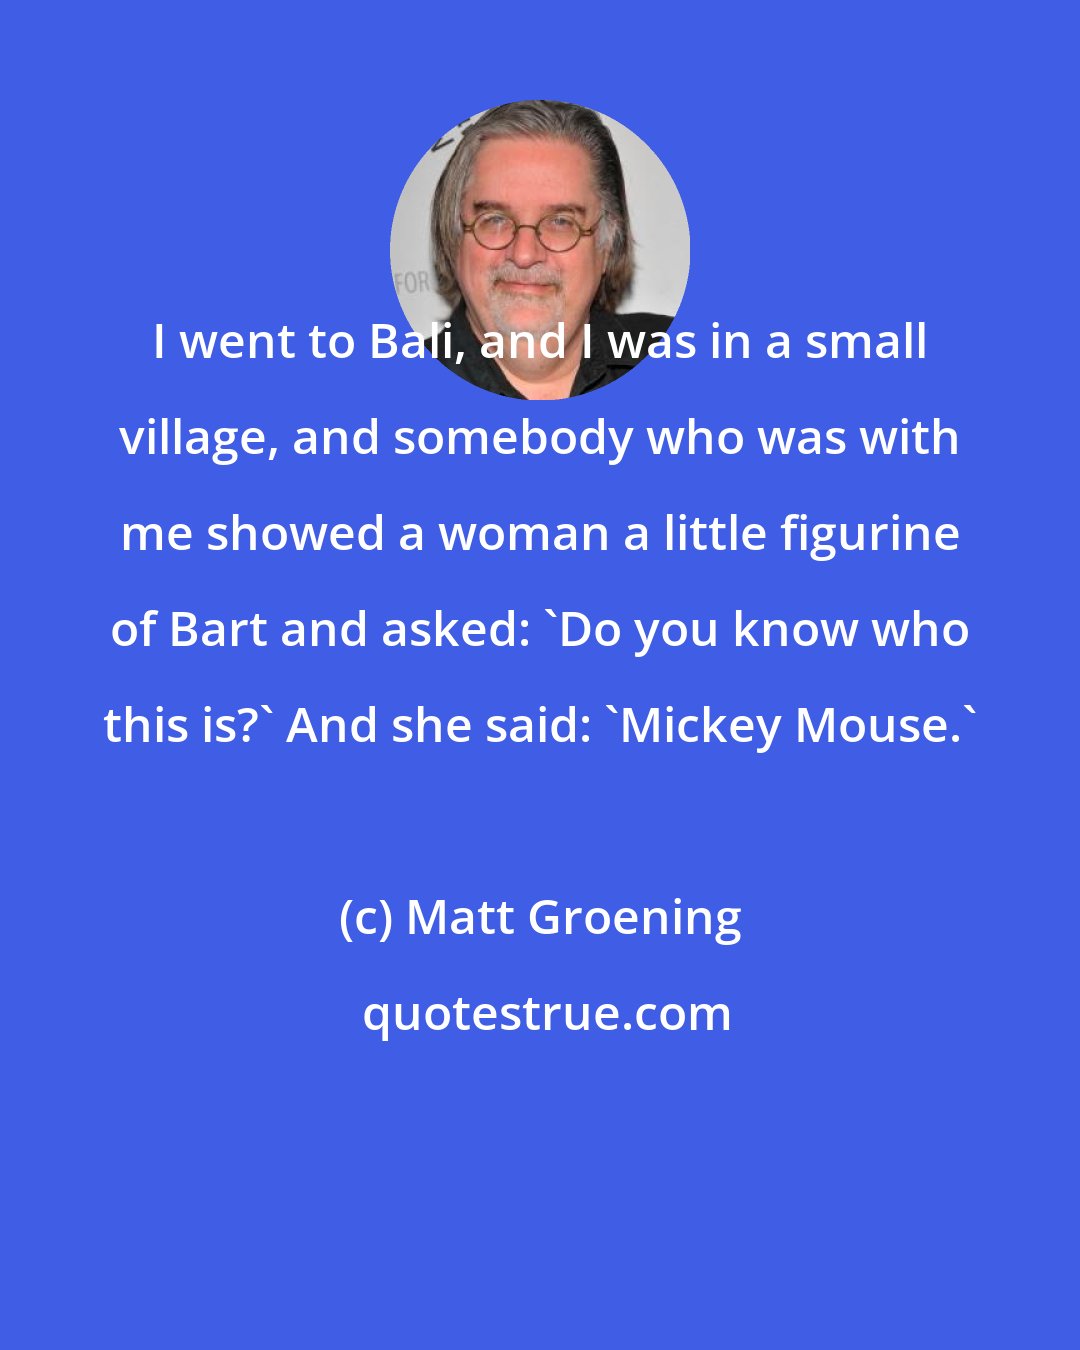 Matt Groening: I went to Bali, and I was in a small village, and somebody who was with me showed a woman a little figurine of Bart and asked: 'Do you know who this is?' And she said: 'Mickey Mouse.'